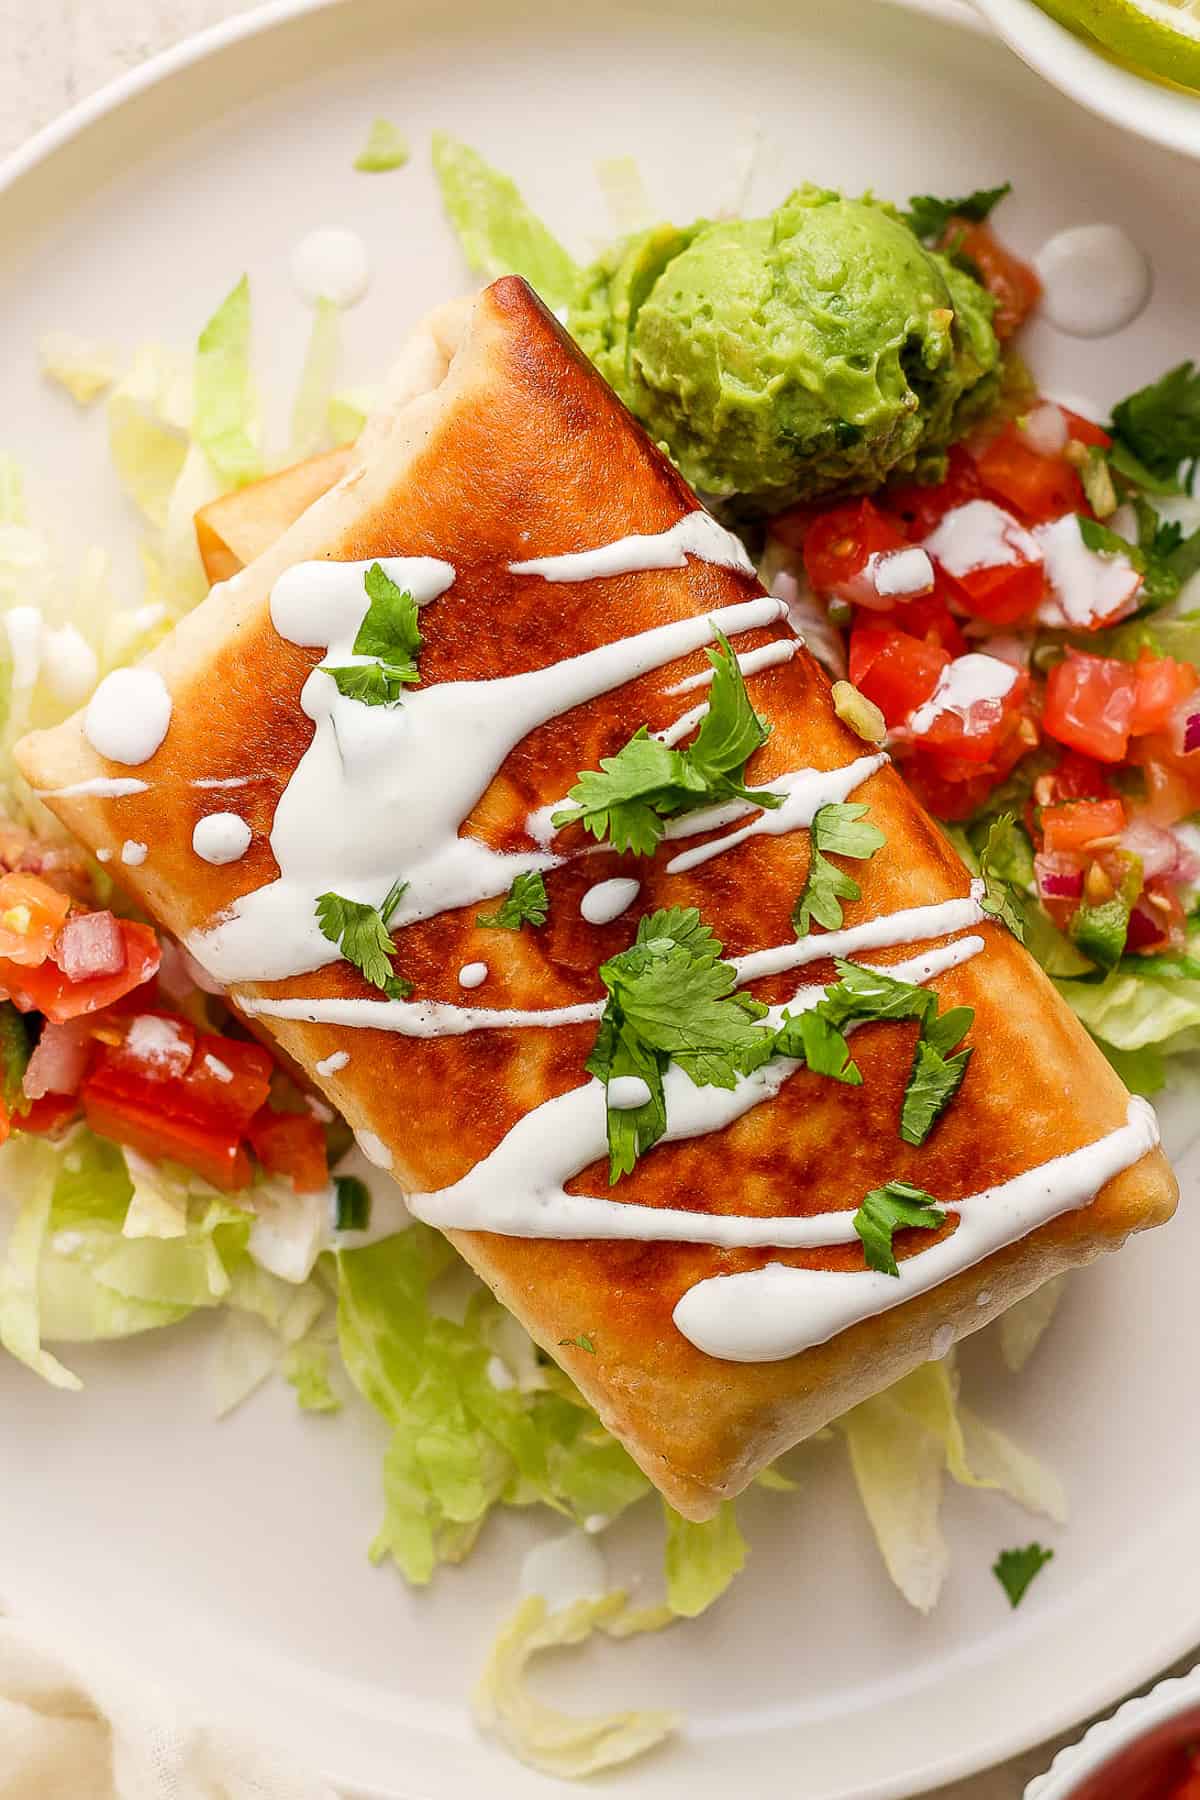 Chimichangas filled with shredded chicken, beans, and cheese, and garnished with a drizzle of Mexican crema or sour cream, cilantro, and served with pico de gallo and guacamole.